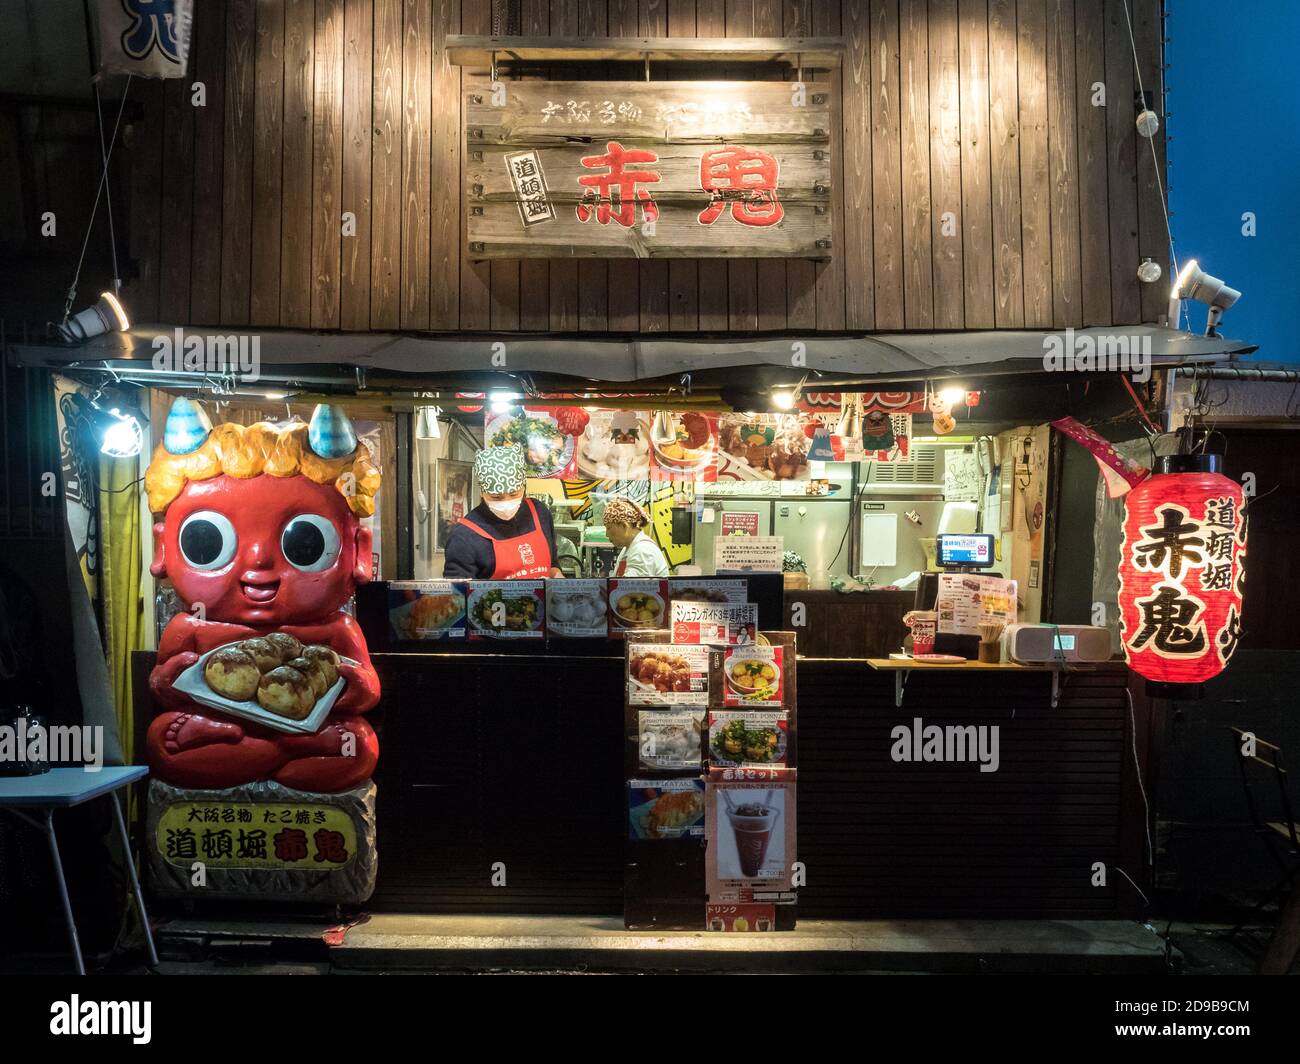 Osaka, Kansai, Japan - Small food restaurant in Dotonbori selling takoyaki, a Japanese snack filled with octopus and cooked in a special molded pan. Stock Photo